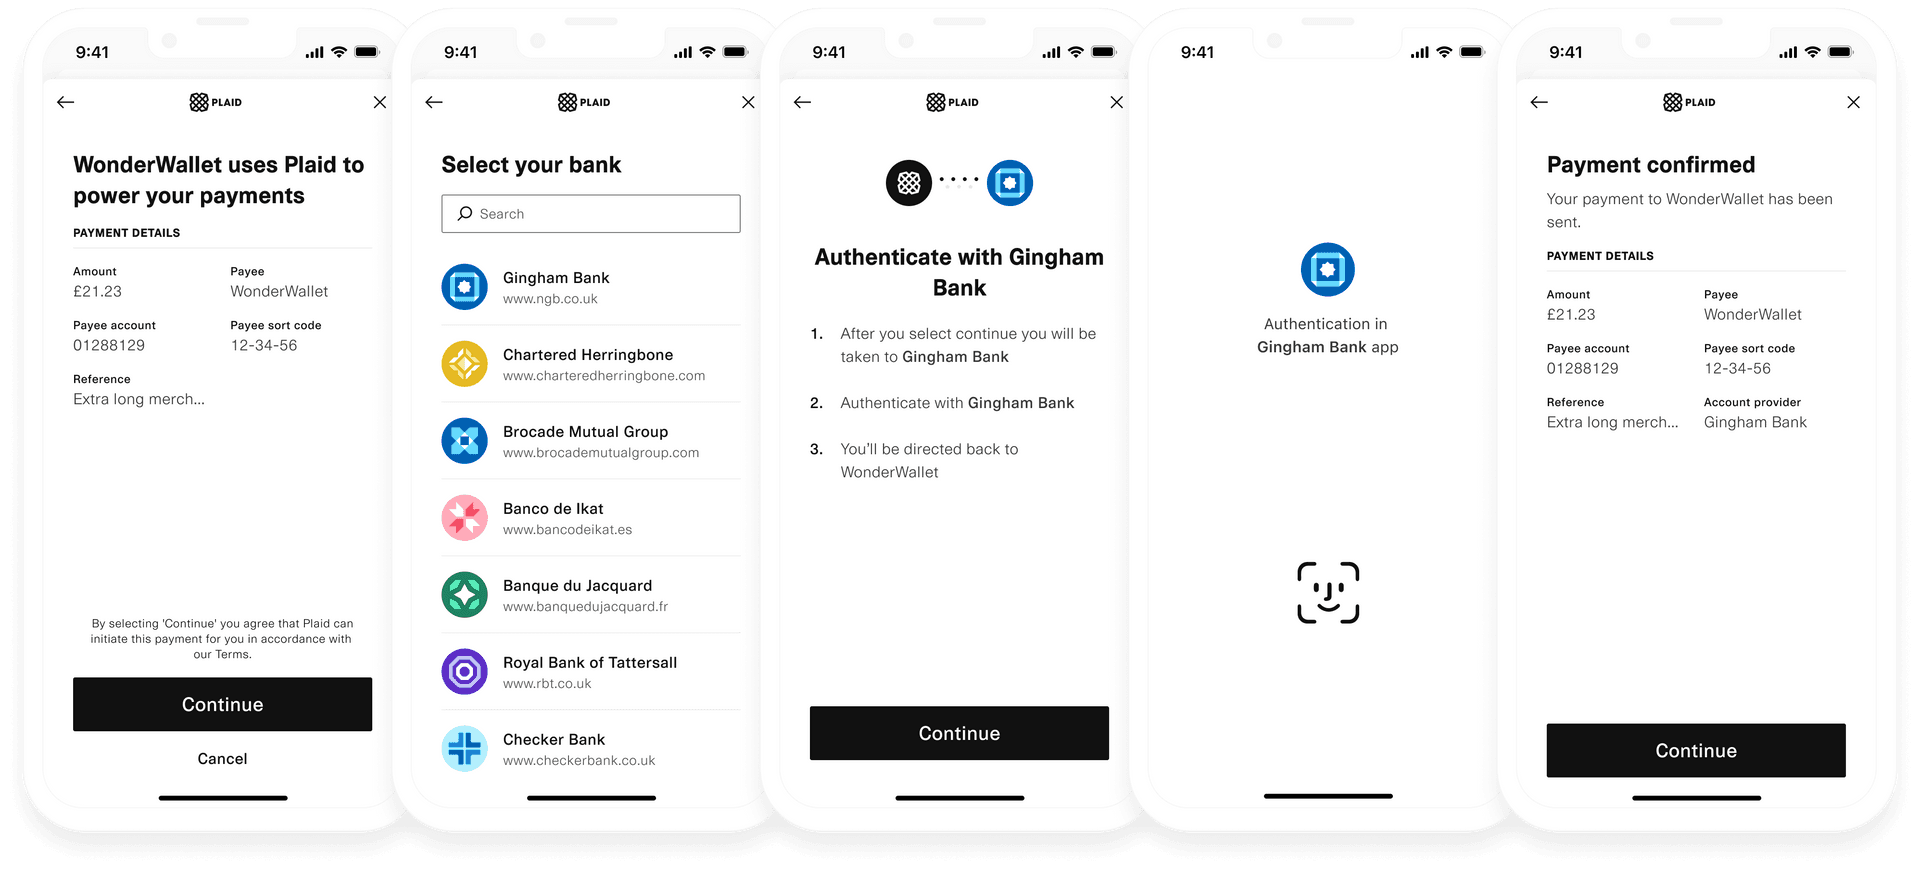 Link flow: proposed payment details on first screen, then select your bank, then authentication screens, then payment confirmed screen with payment details